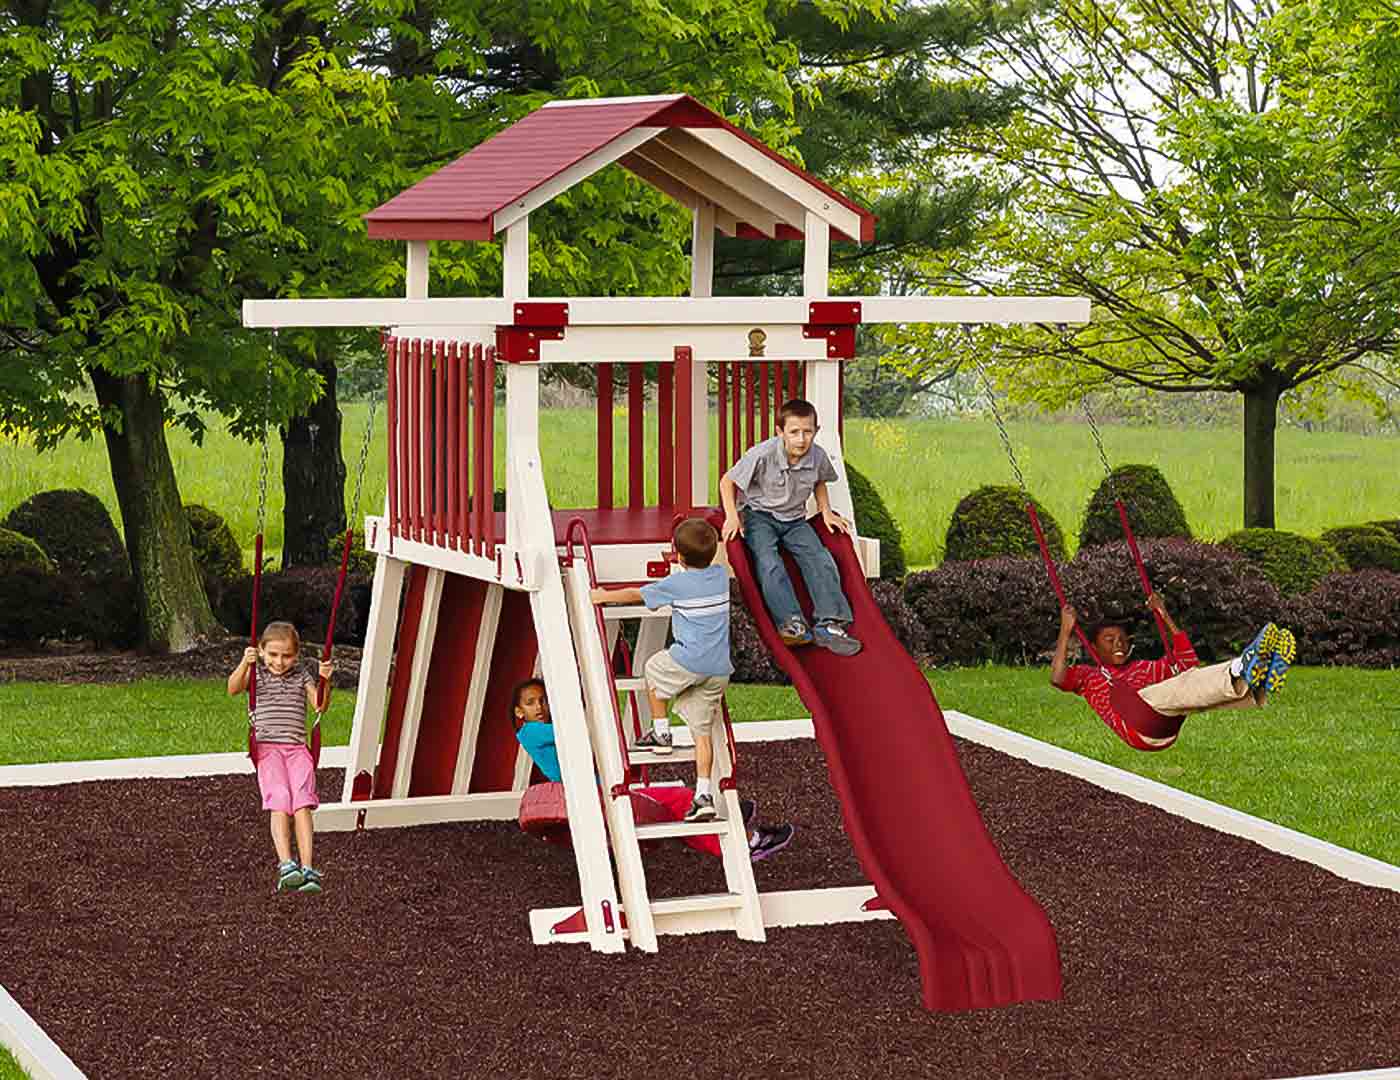 Sun Rise Sheds | Playsets | Giggle Junction Series